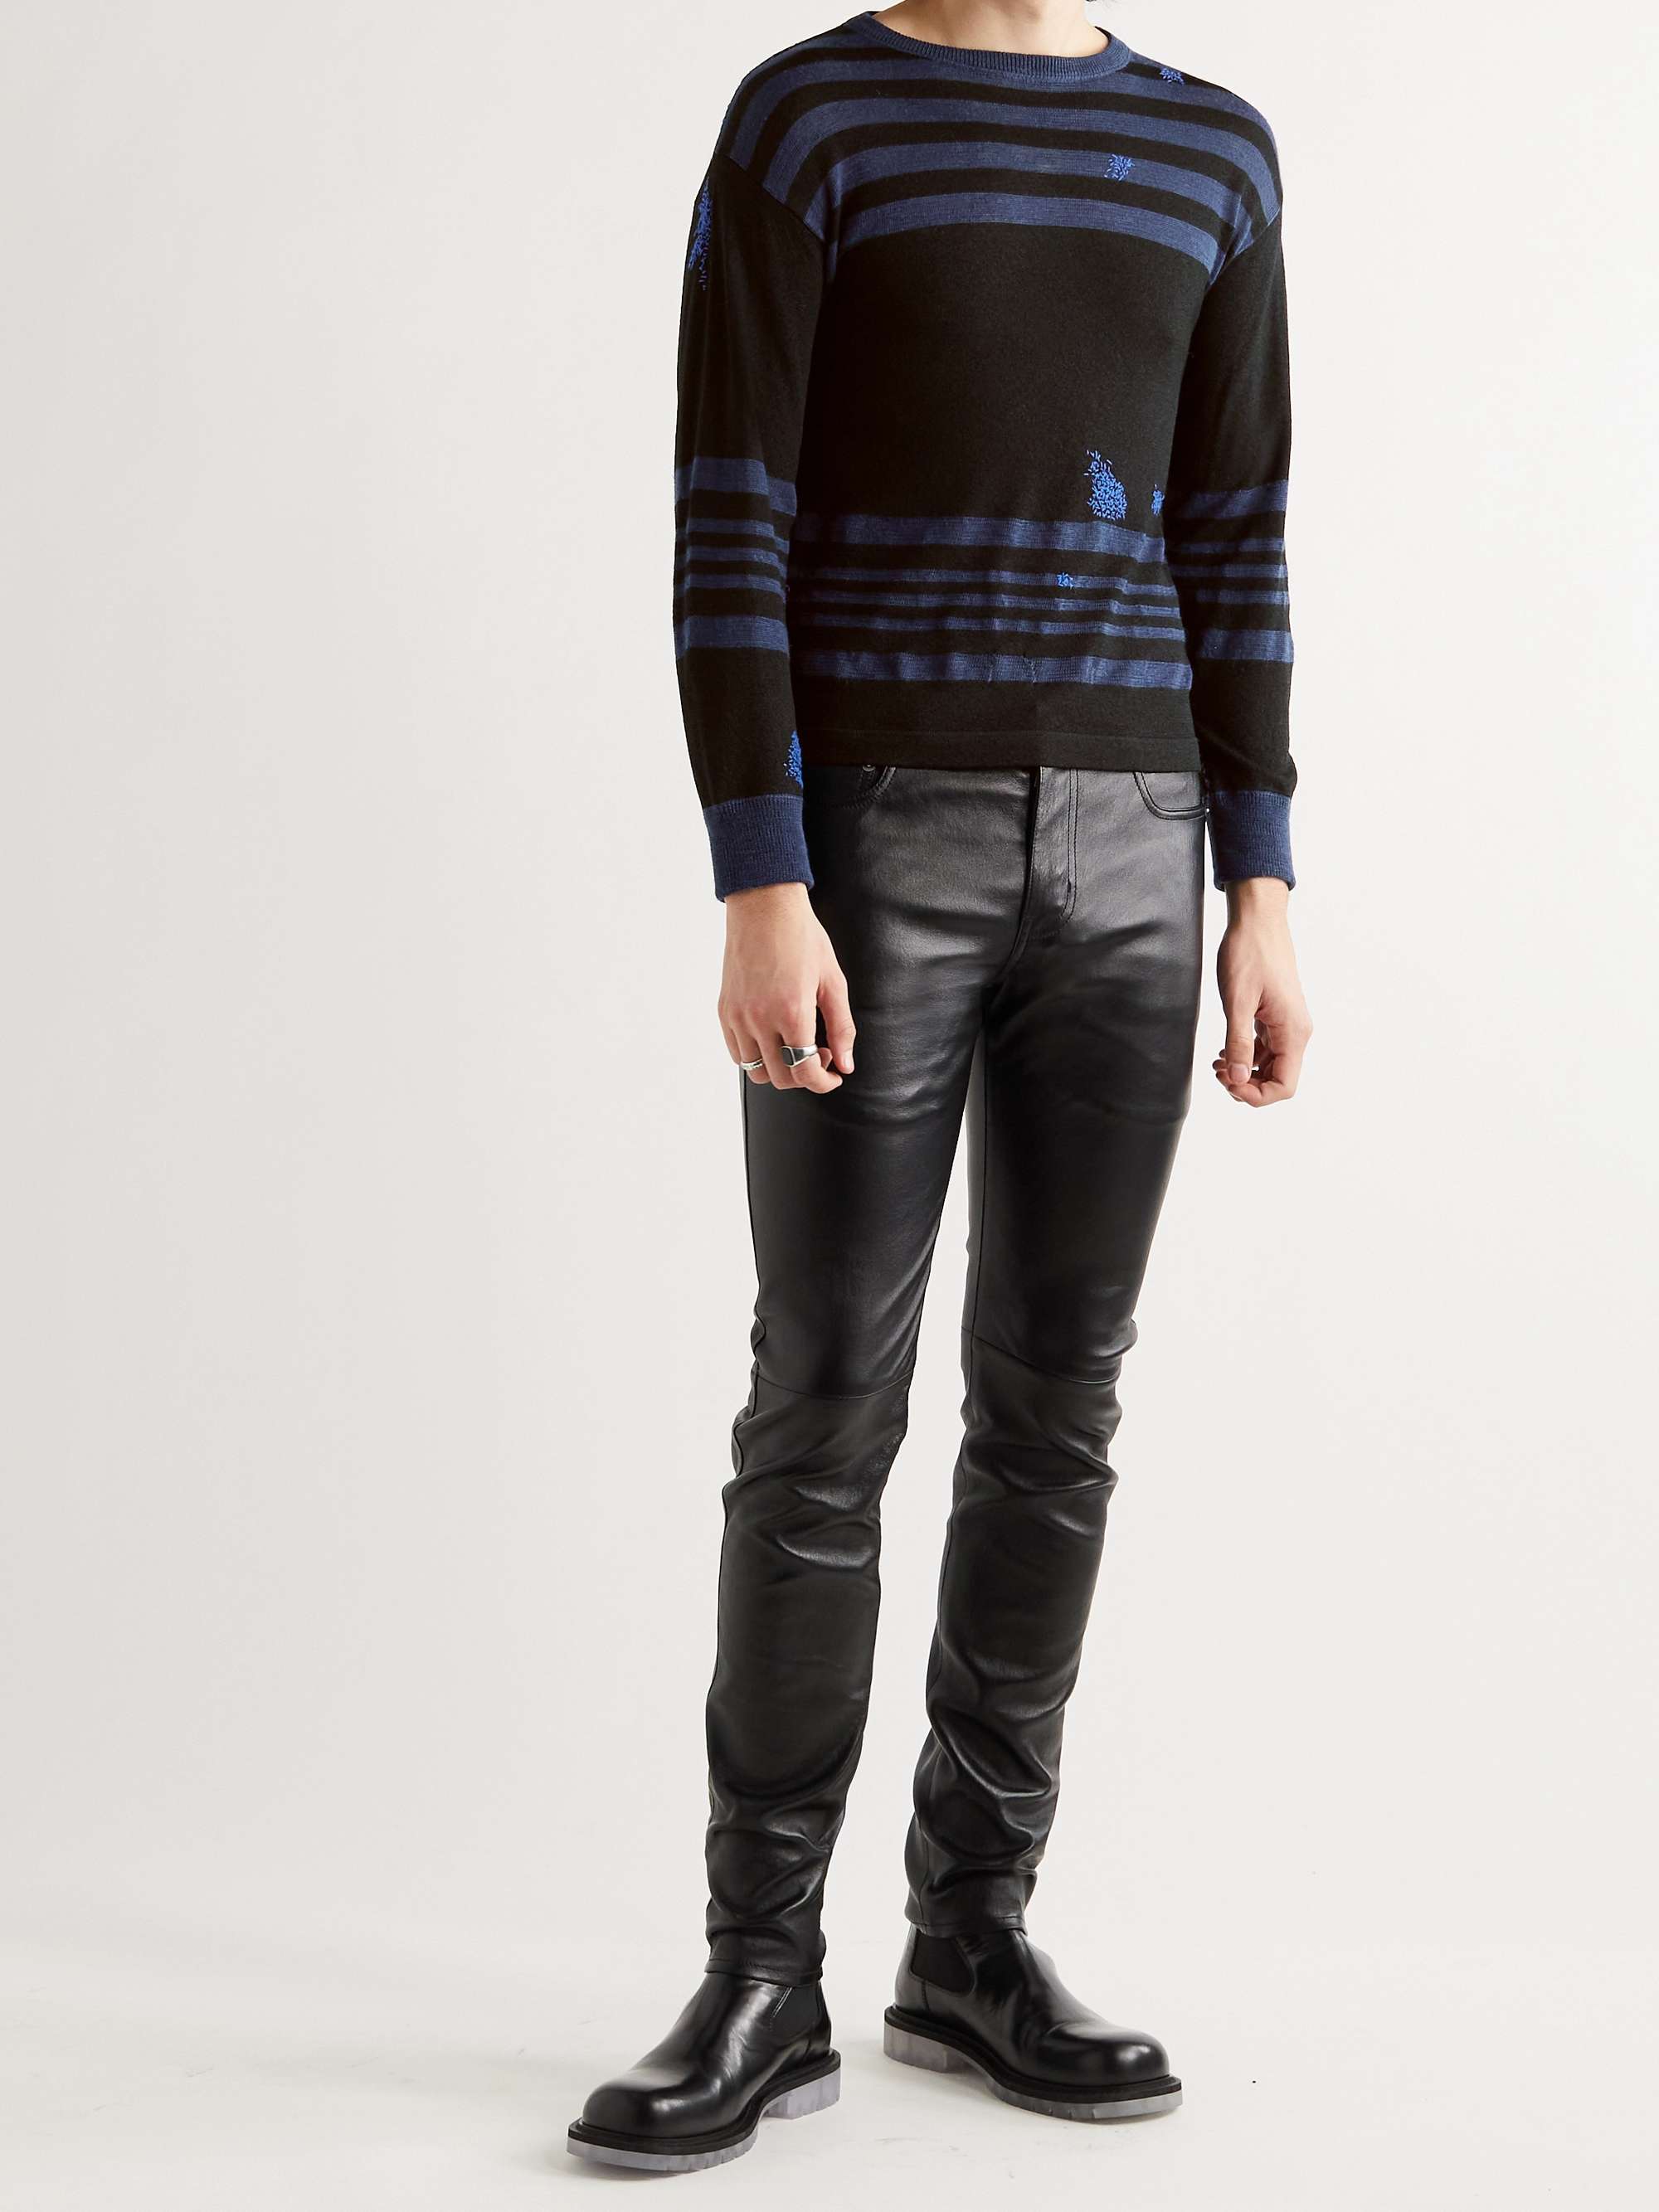 MAISON MARGIELA Embroidered Striped Knitted Sweater for Men | MR PORTER